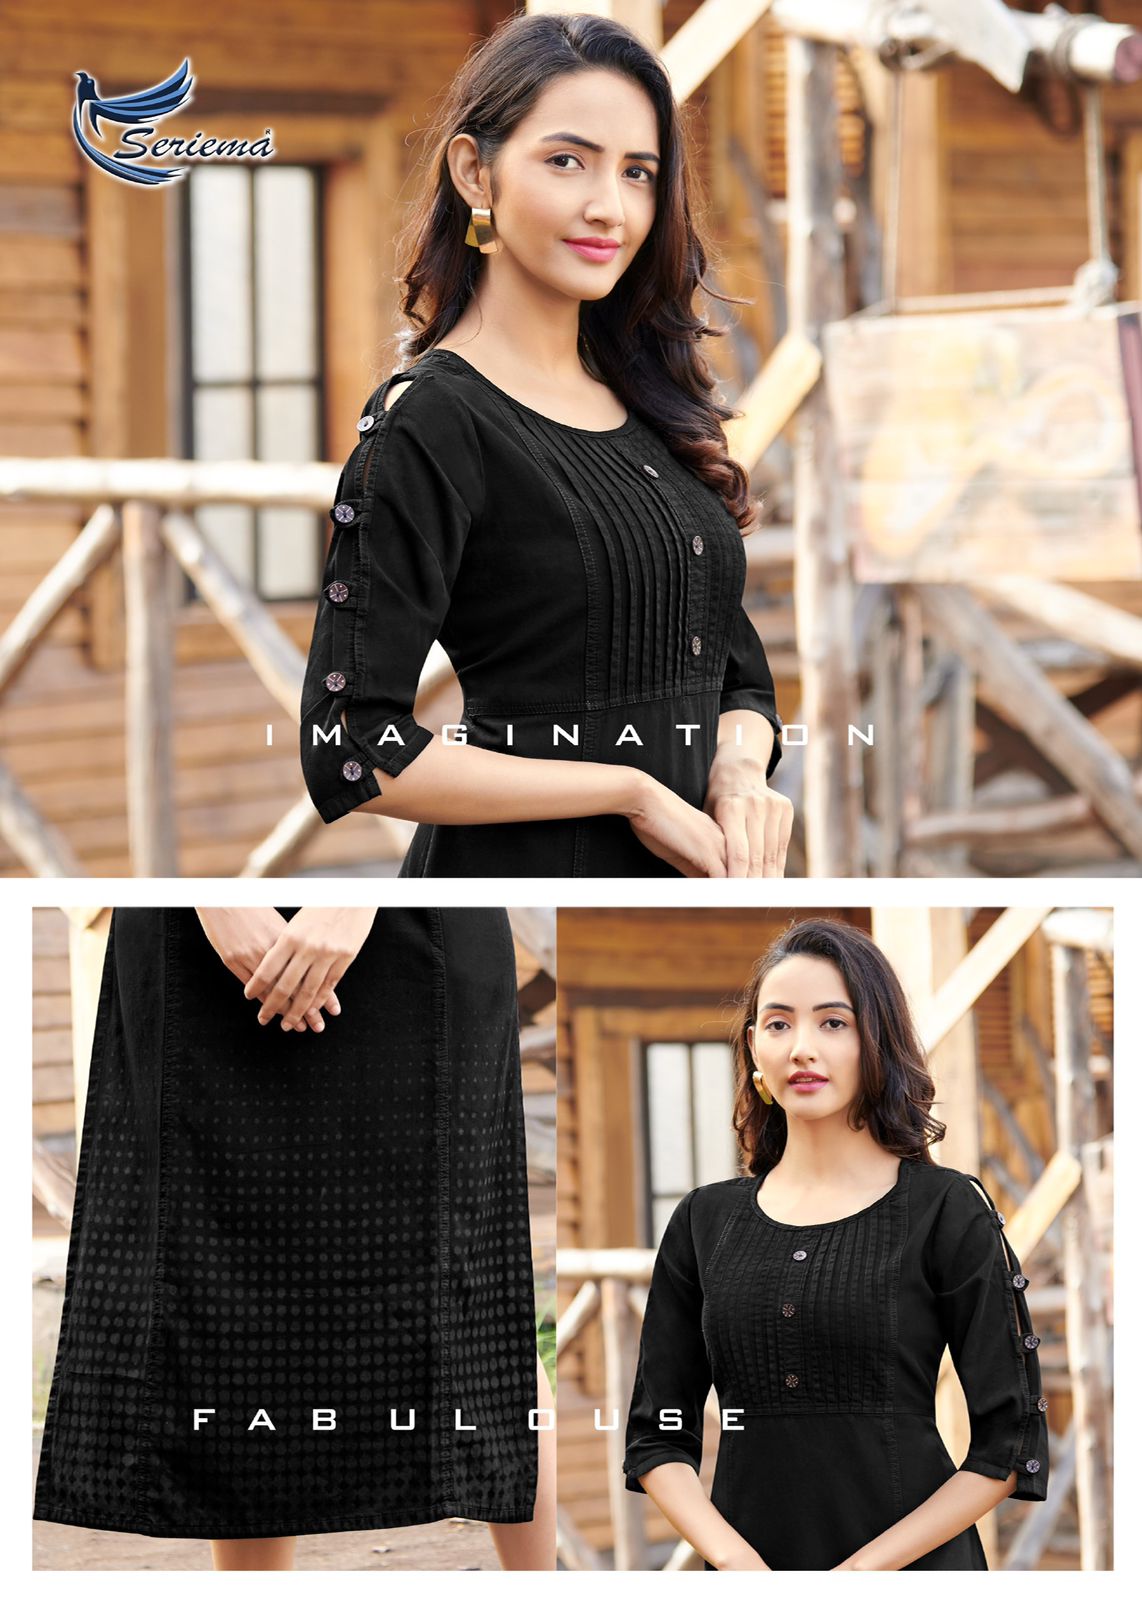 Latest Kurtis Styles Best Suited For Jeans | Saree.com by Asopalav